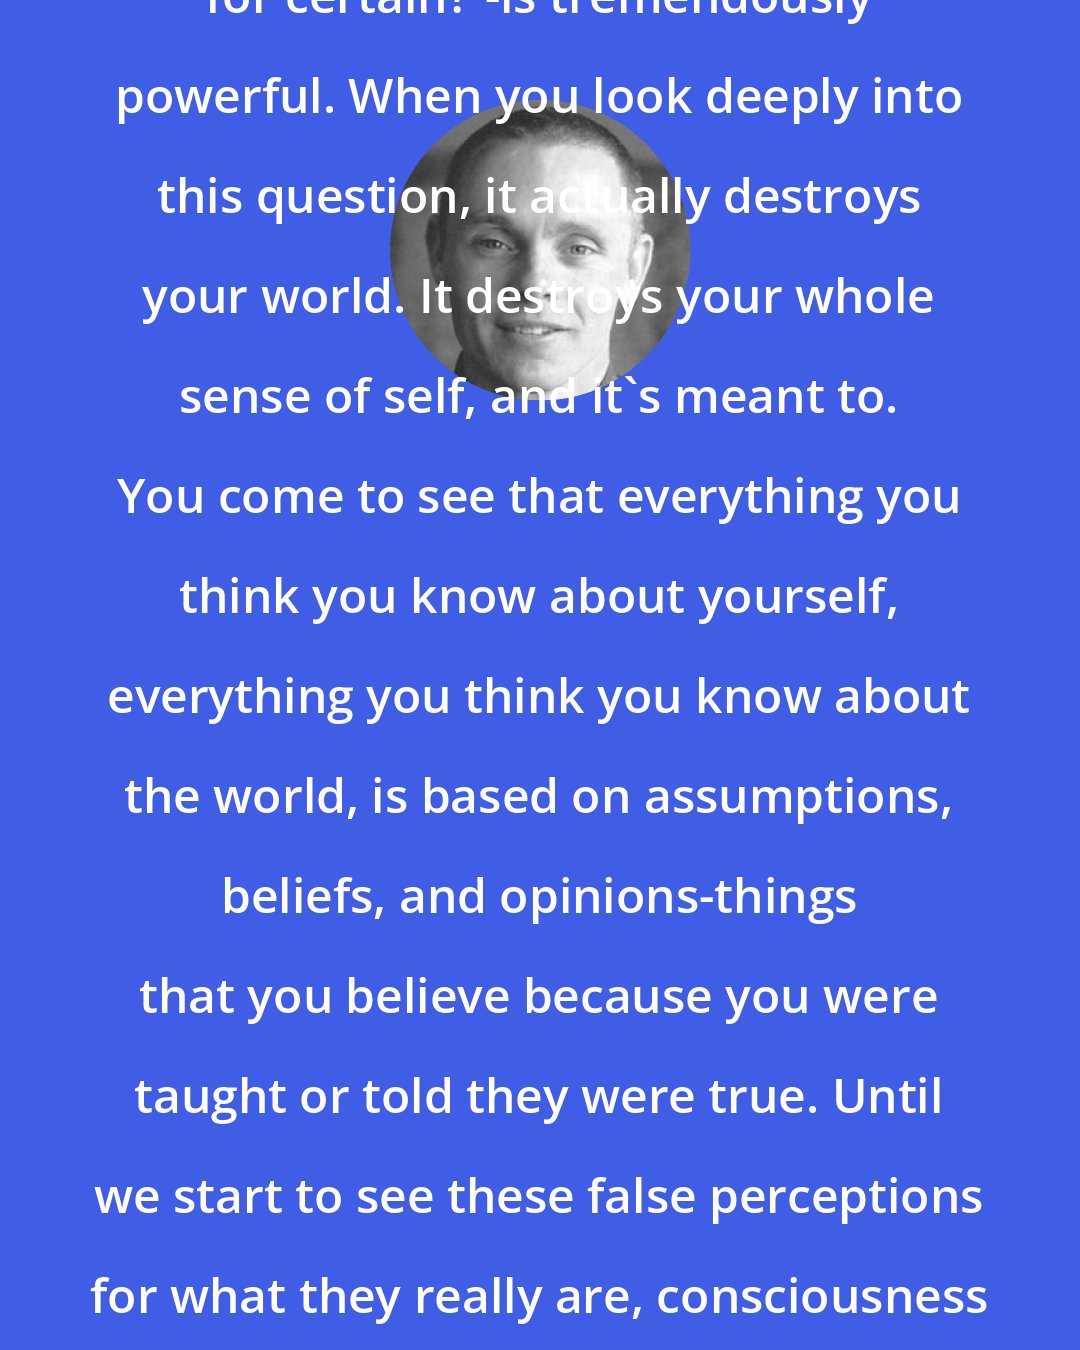 Adyashanti: This one question-'What do I know for certain?'-is tremendously powerful. When you look deeply into this question, it actually destroys your world. It destroys your whole sense of self, and it's meant to. You come to see that everything you think you know about yourself, everything you think you know about the world, is based on assumptions, beliefs, and opinions-things that you believe because you were taught or told they were true. Until we start to see these false perceptions for what they really are, consciousness will be imprisoned within the dream state.